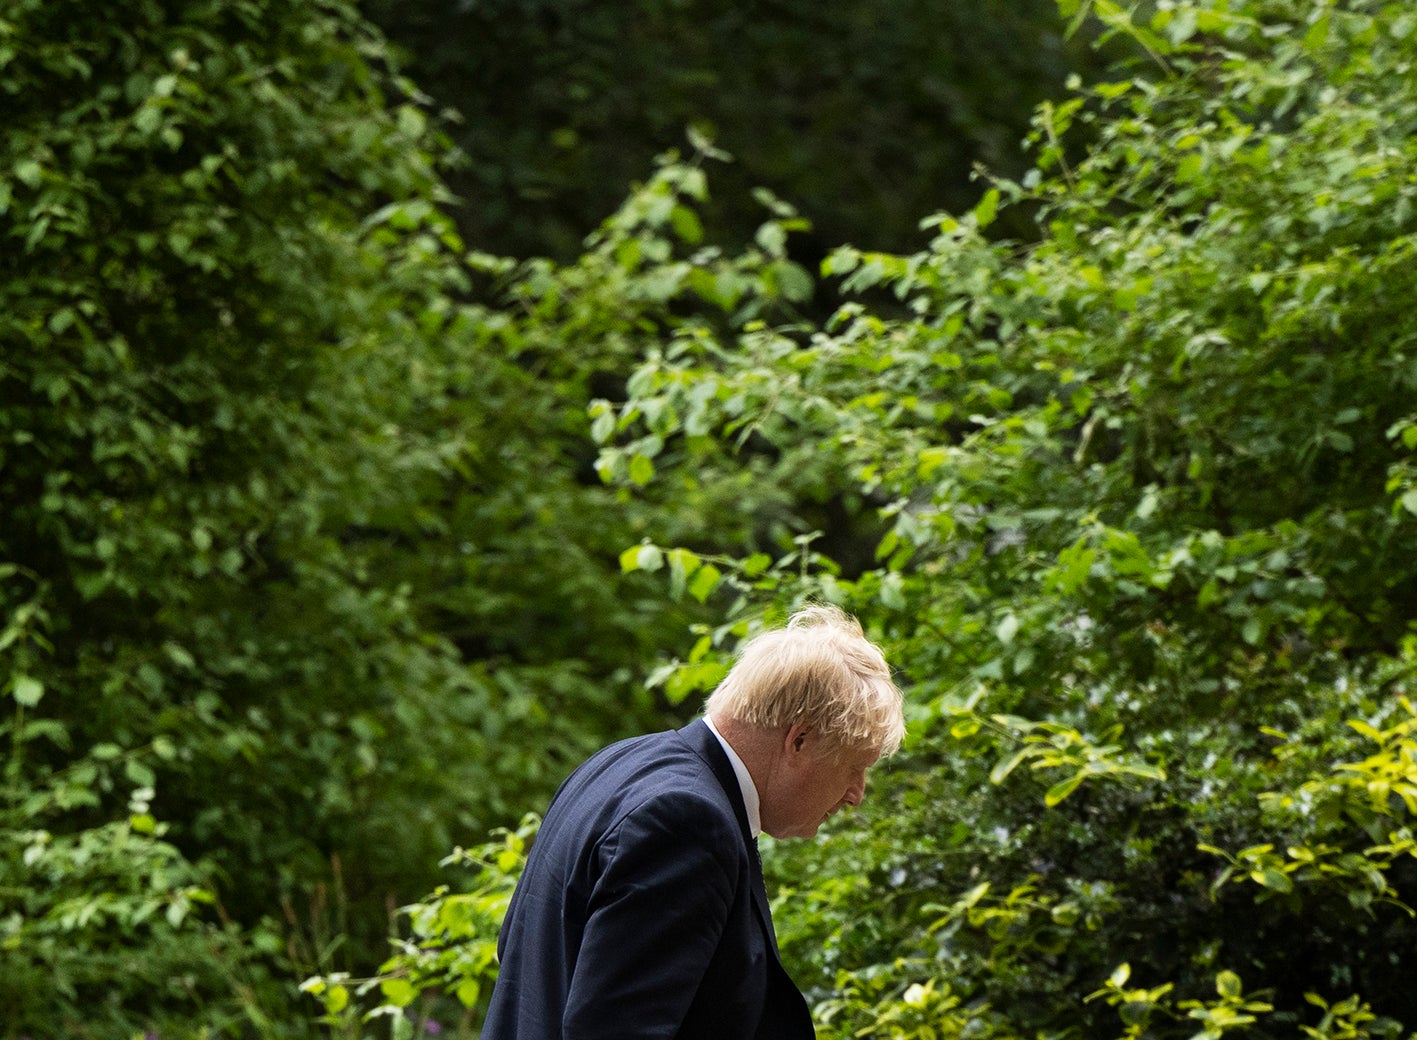 Boris Johnson has infected his party with chaos